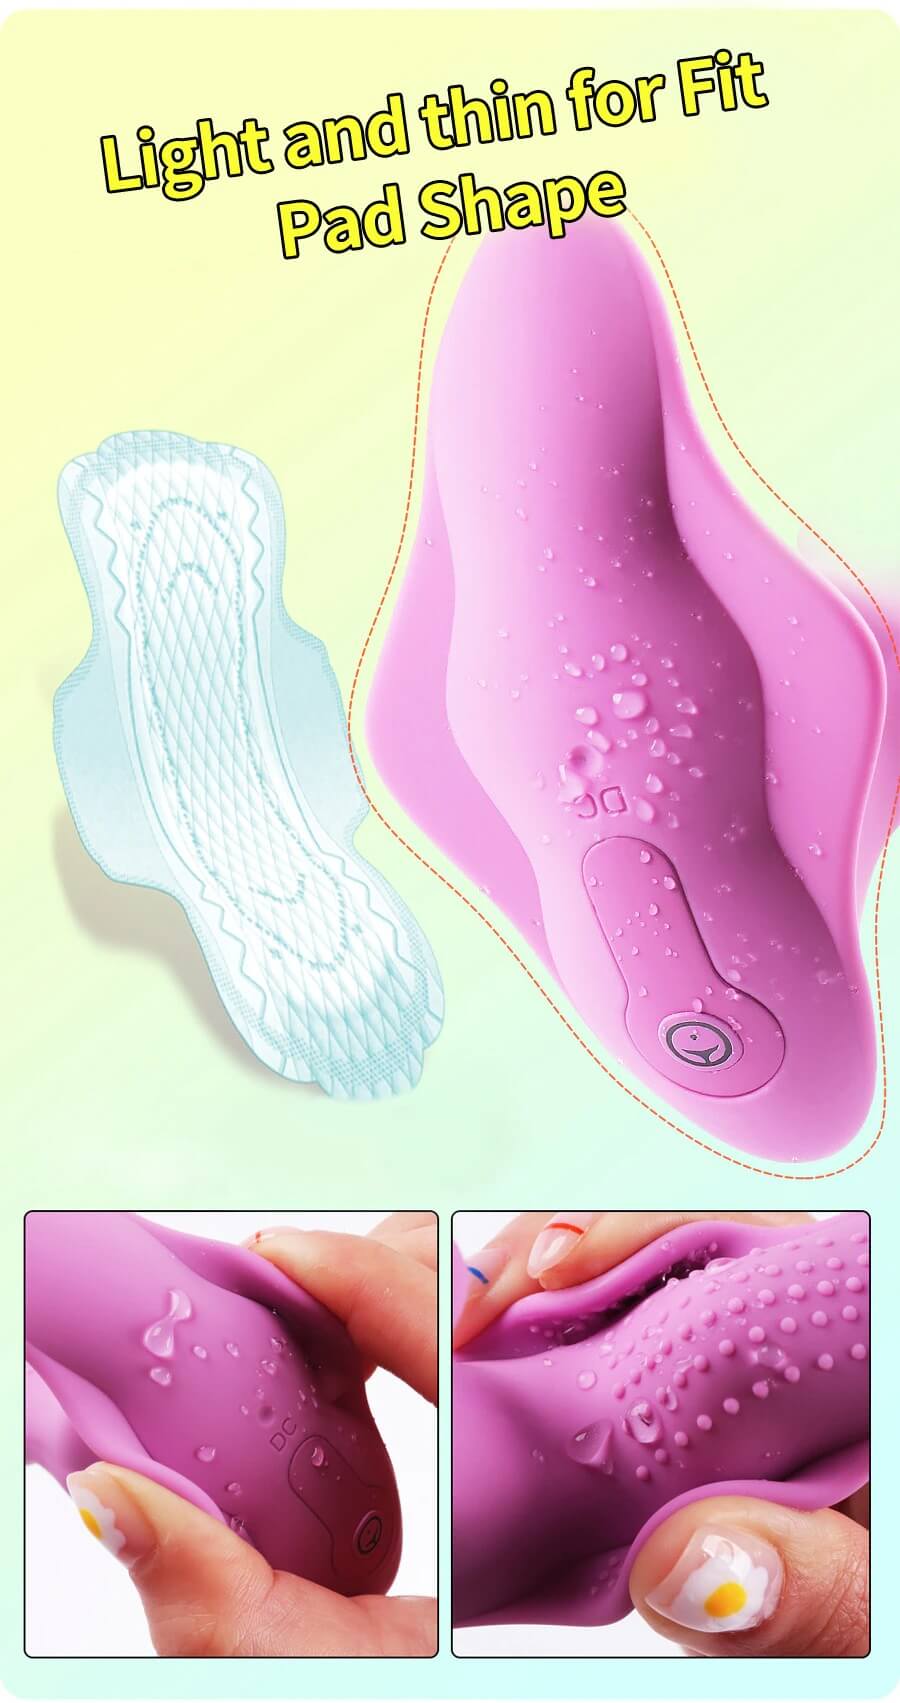 Wearable-Butterfly-Dildo-Vibrator-Adult-Sex-Toys-for-Women-G-Spot-Clitoris-Stimulator-Wireless-Remote-Control-Sex-Toy